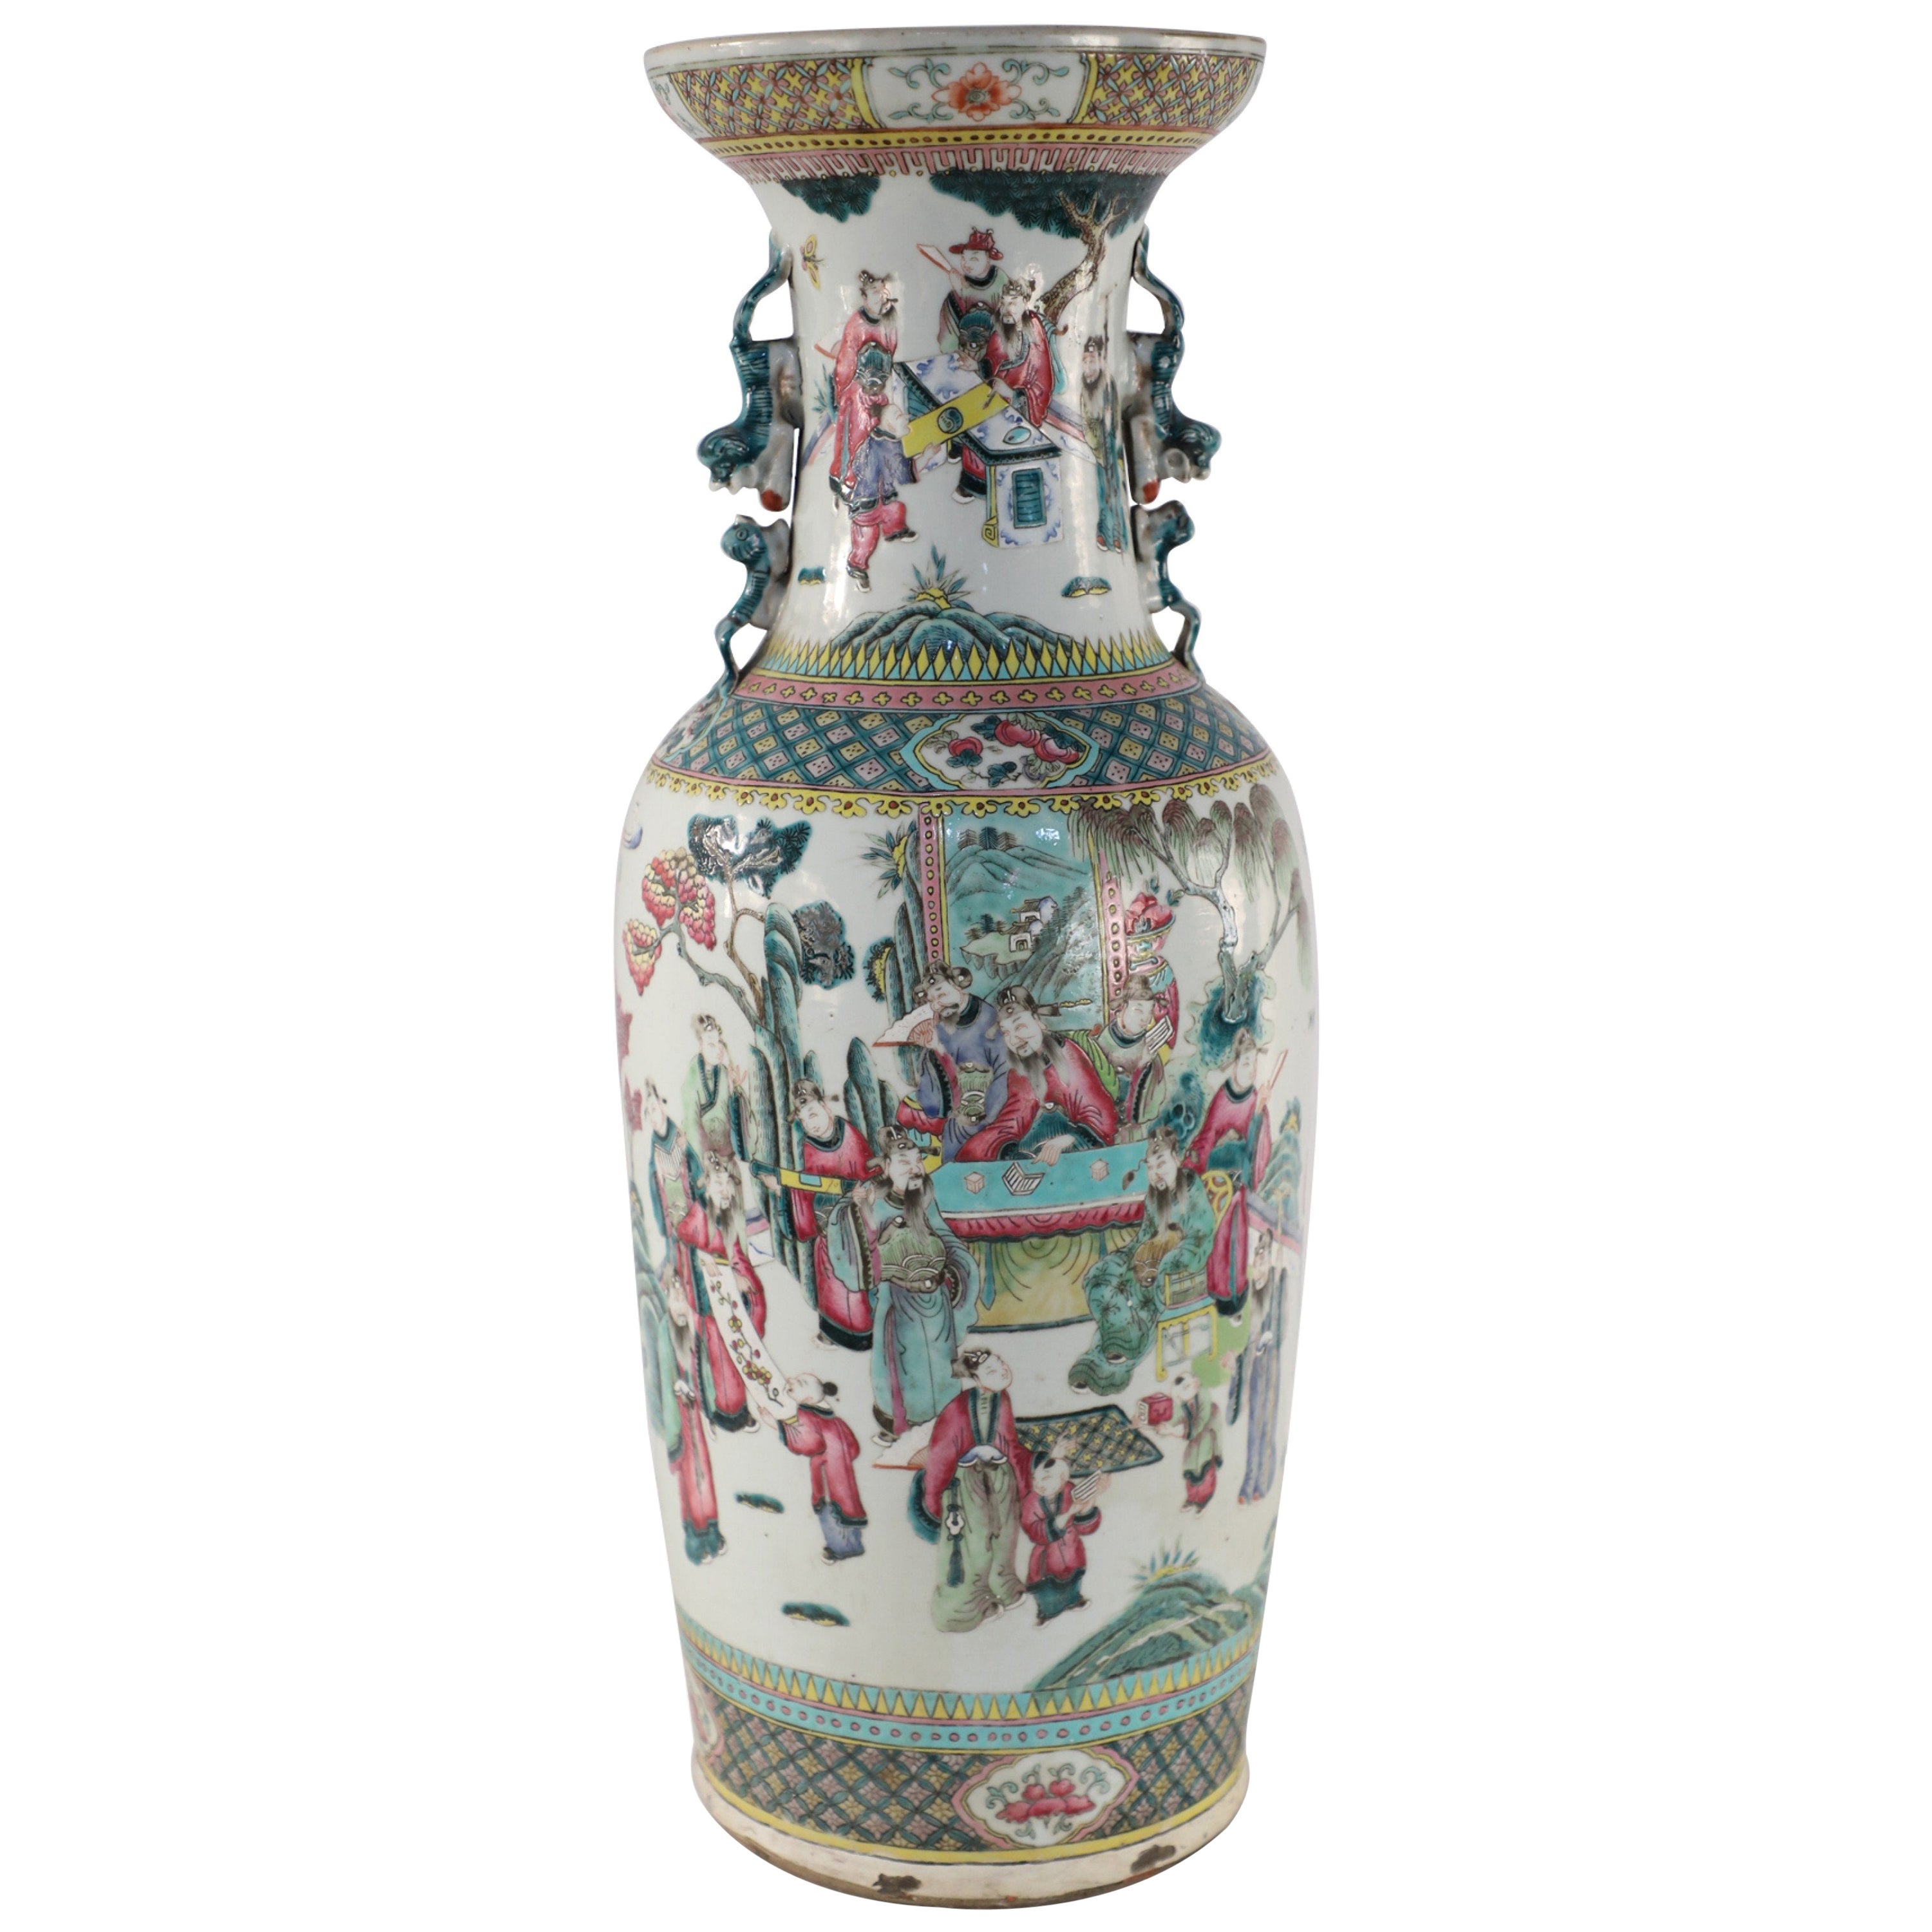 Chinese White and Figurative Pastoral Scene Porcelain Urn